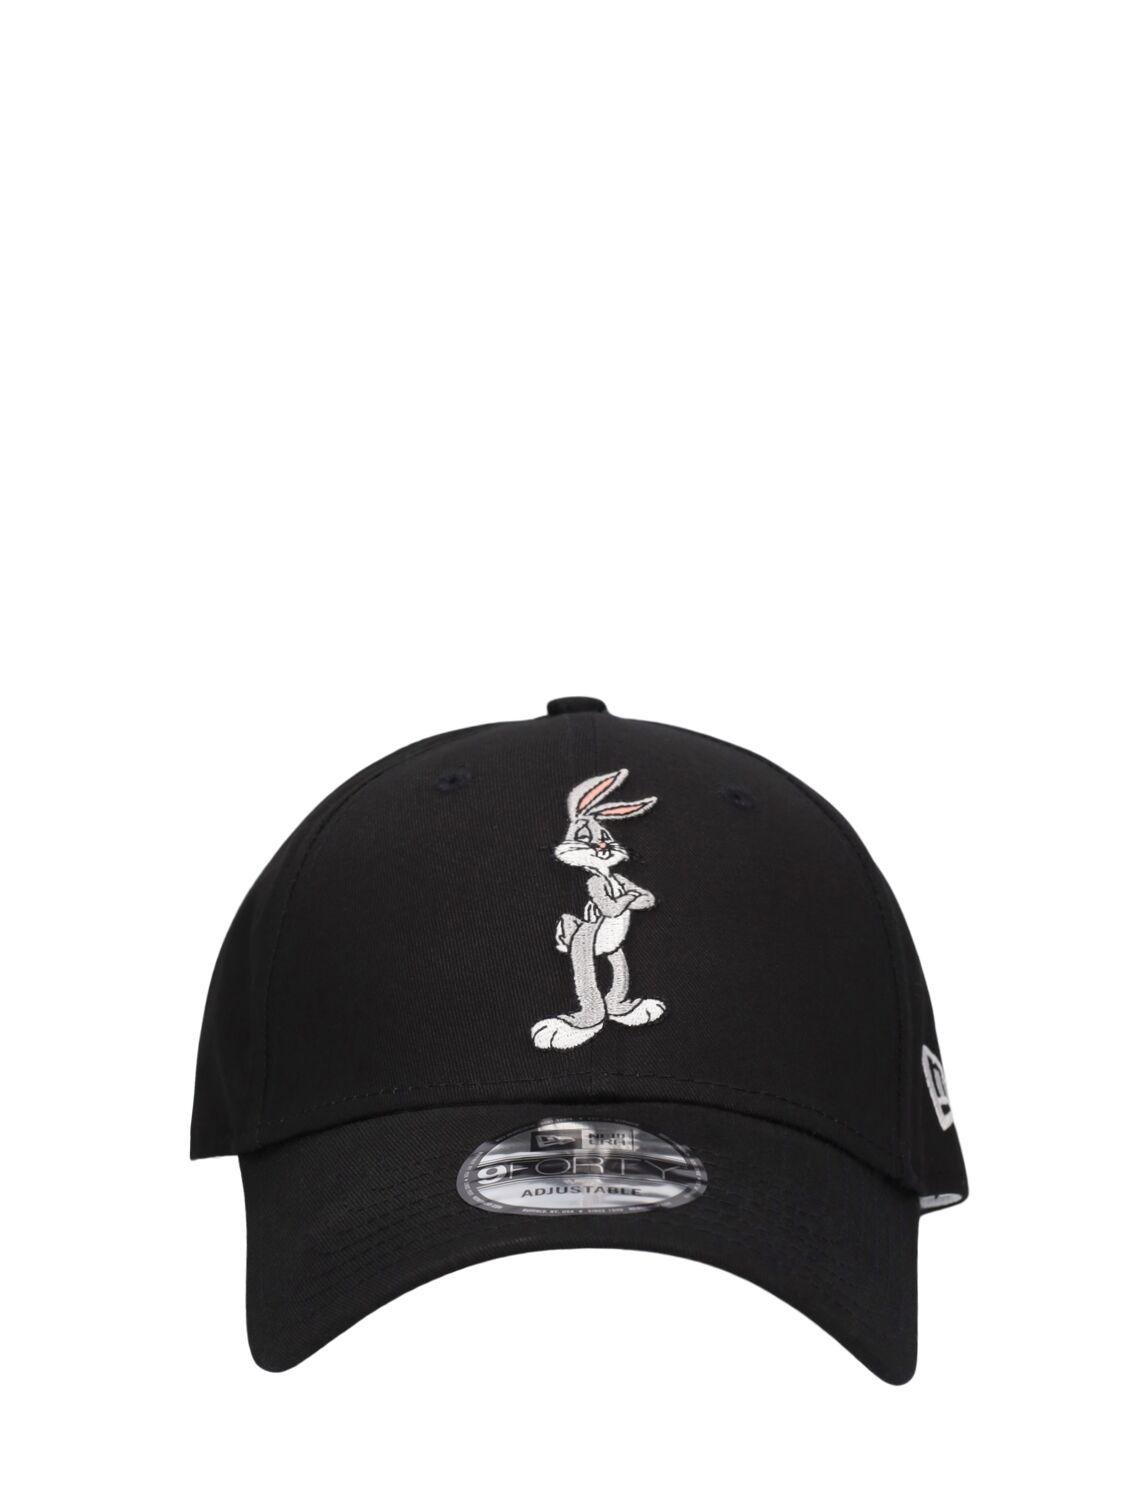 Bugs Bunny Looney Tunes 9forty Cap by NEW ERA